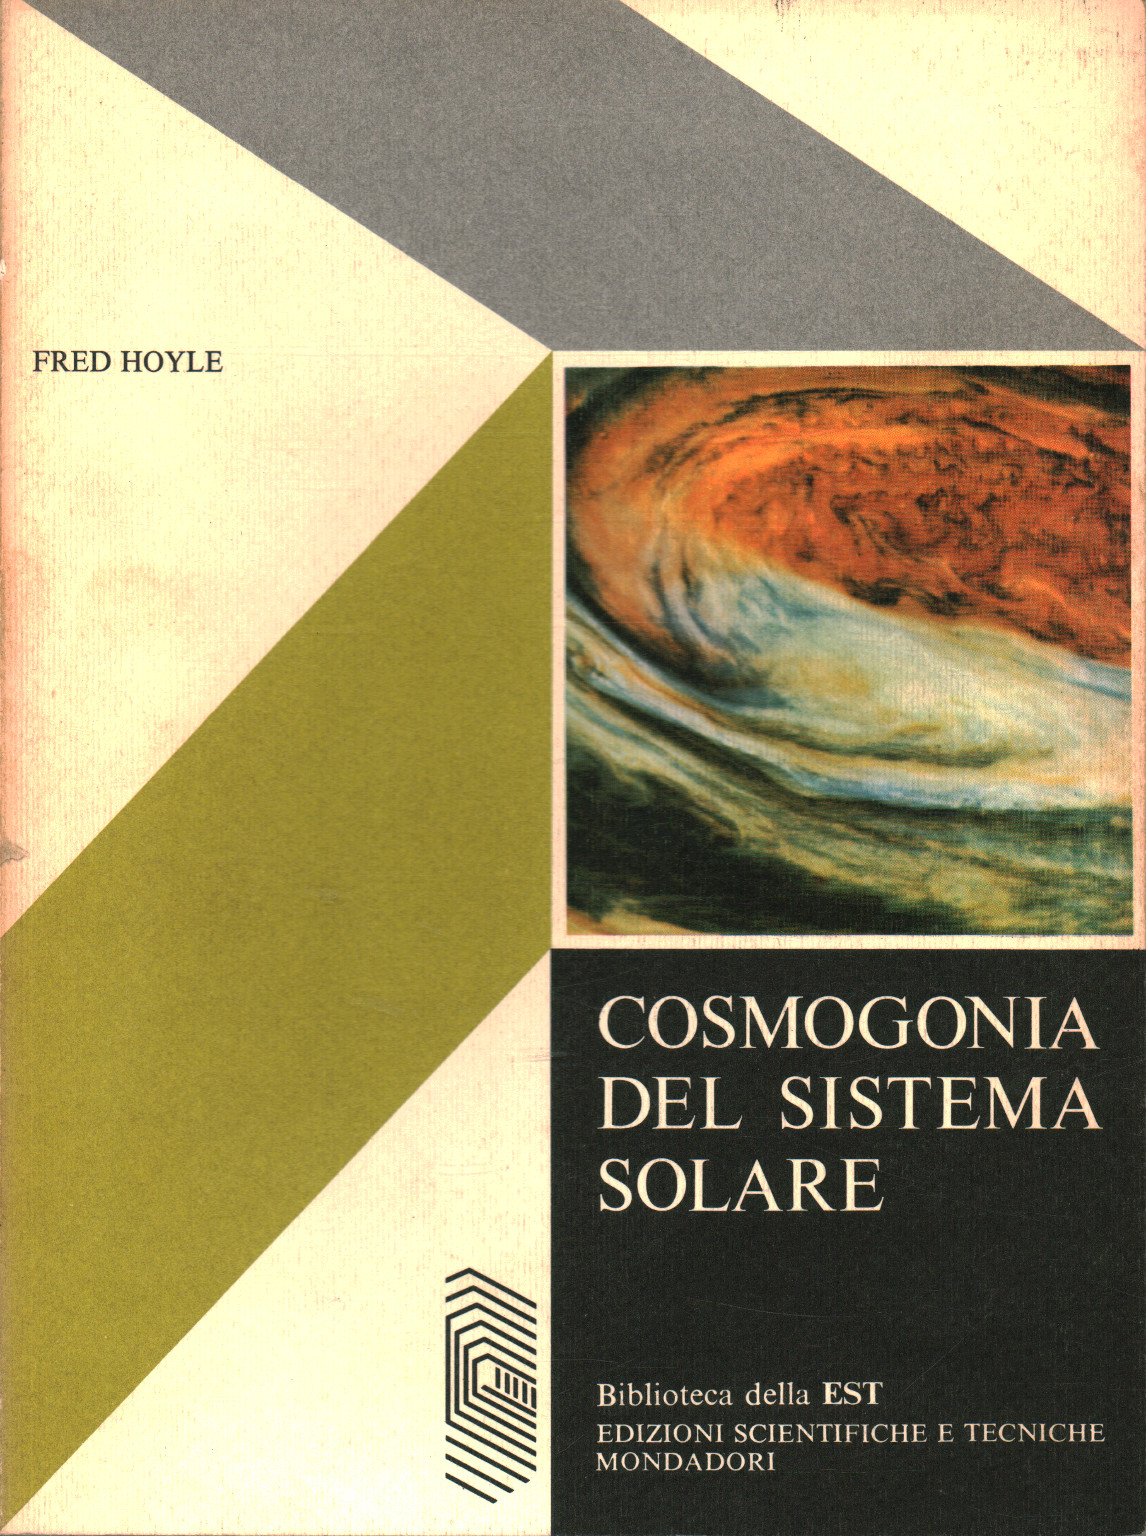 The cosmogony of the solar system, Fred Hoyle